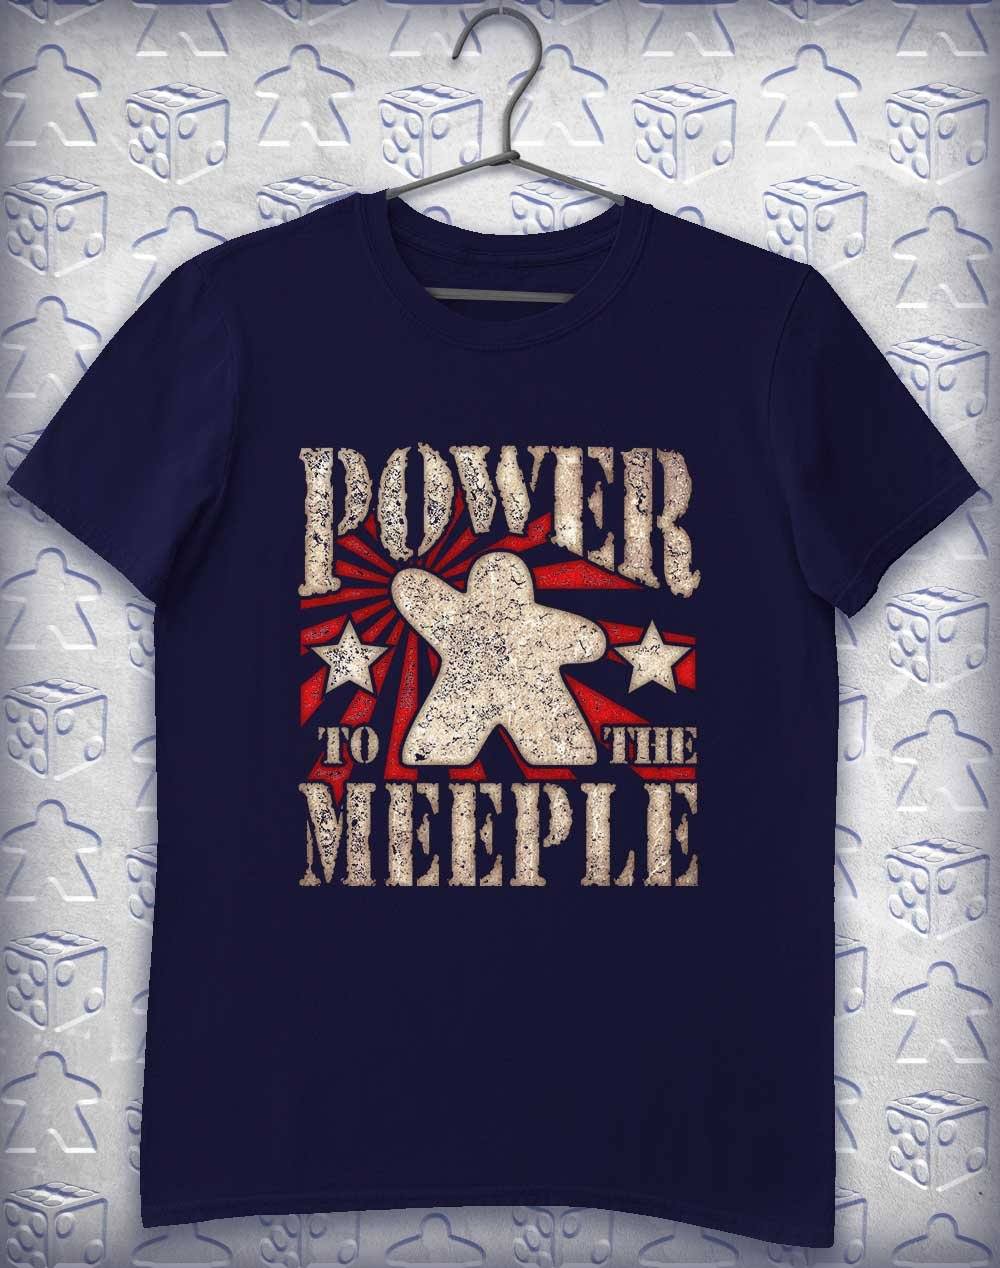 Power to the Meeple Alphagamer T-Shirt S / Navy  - Off World Tees